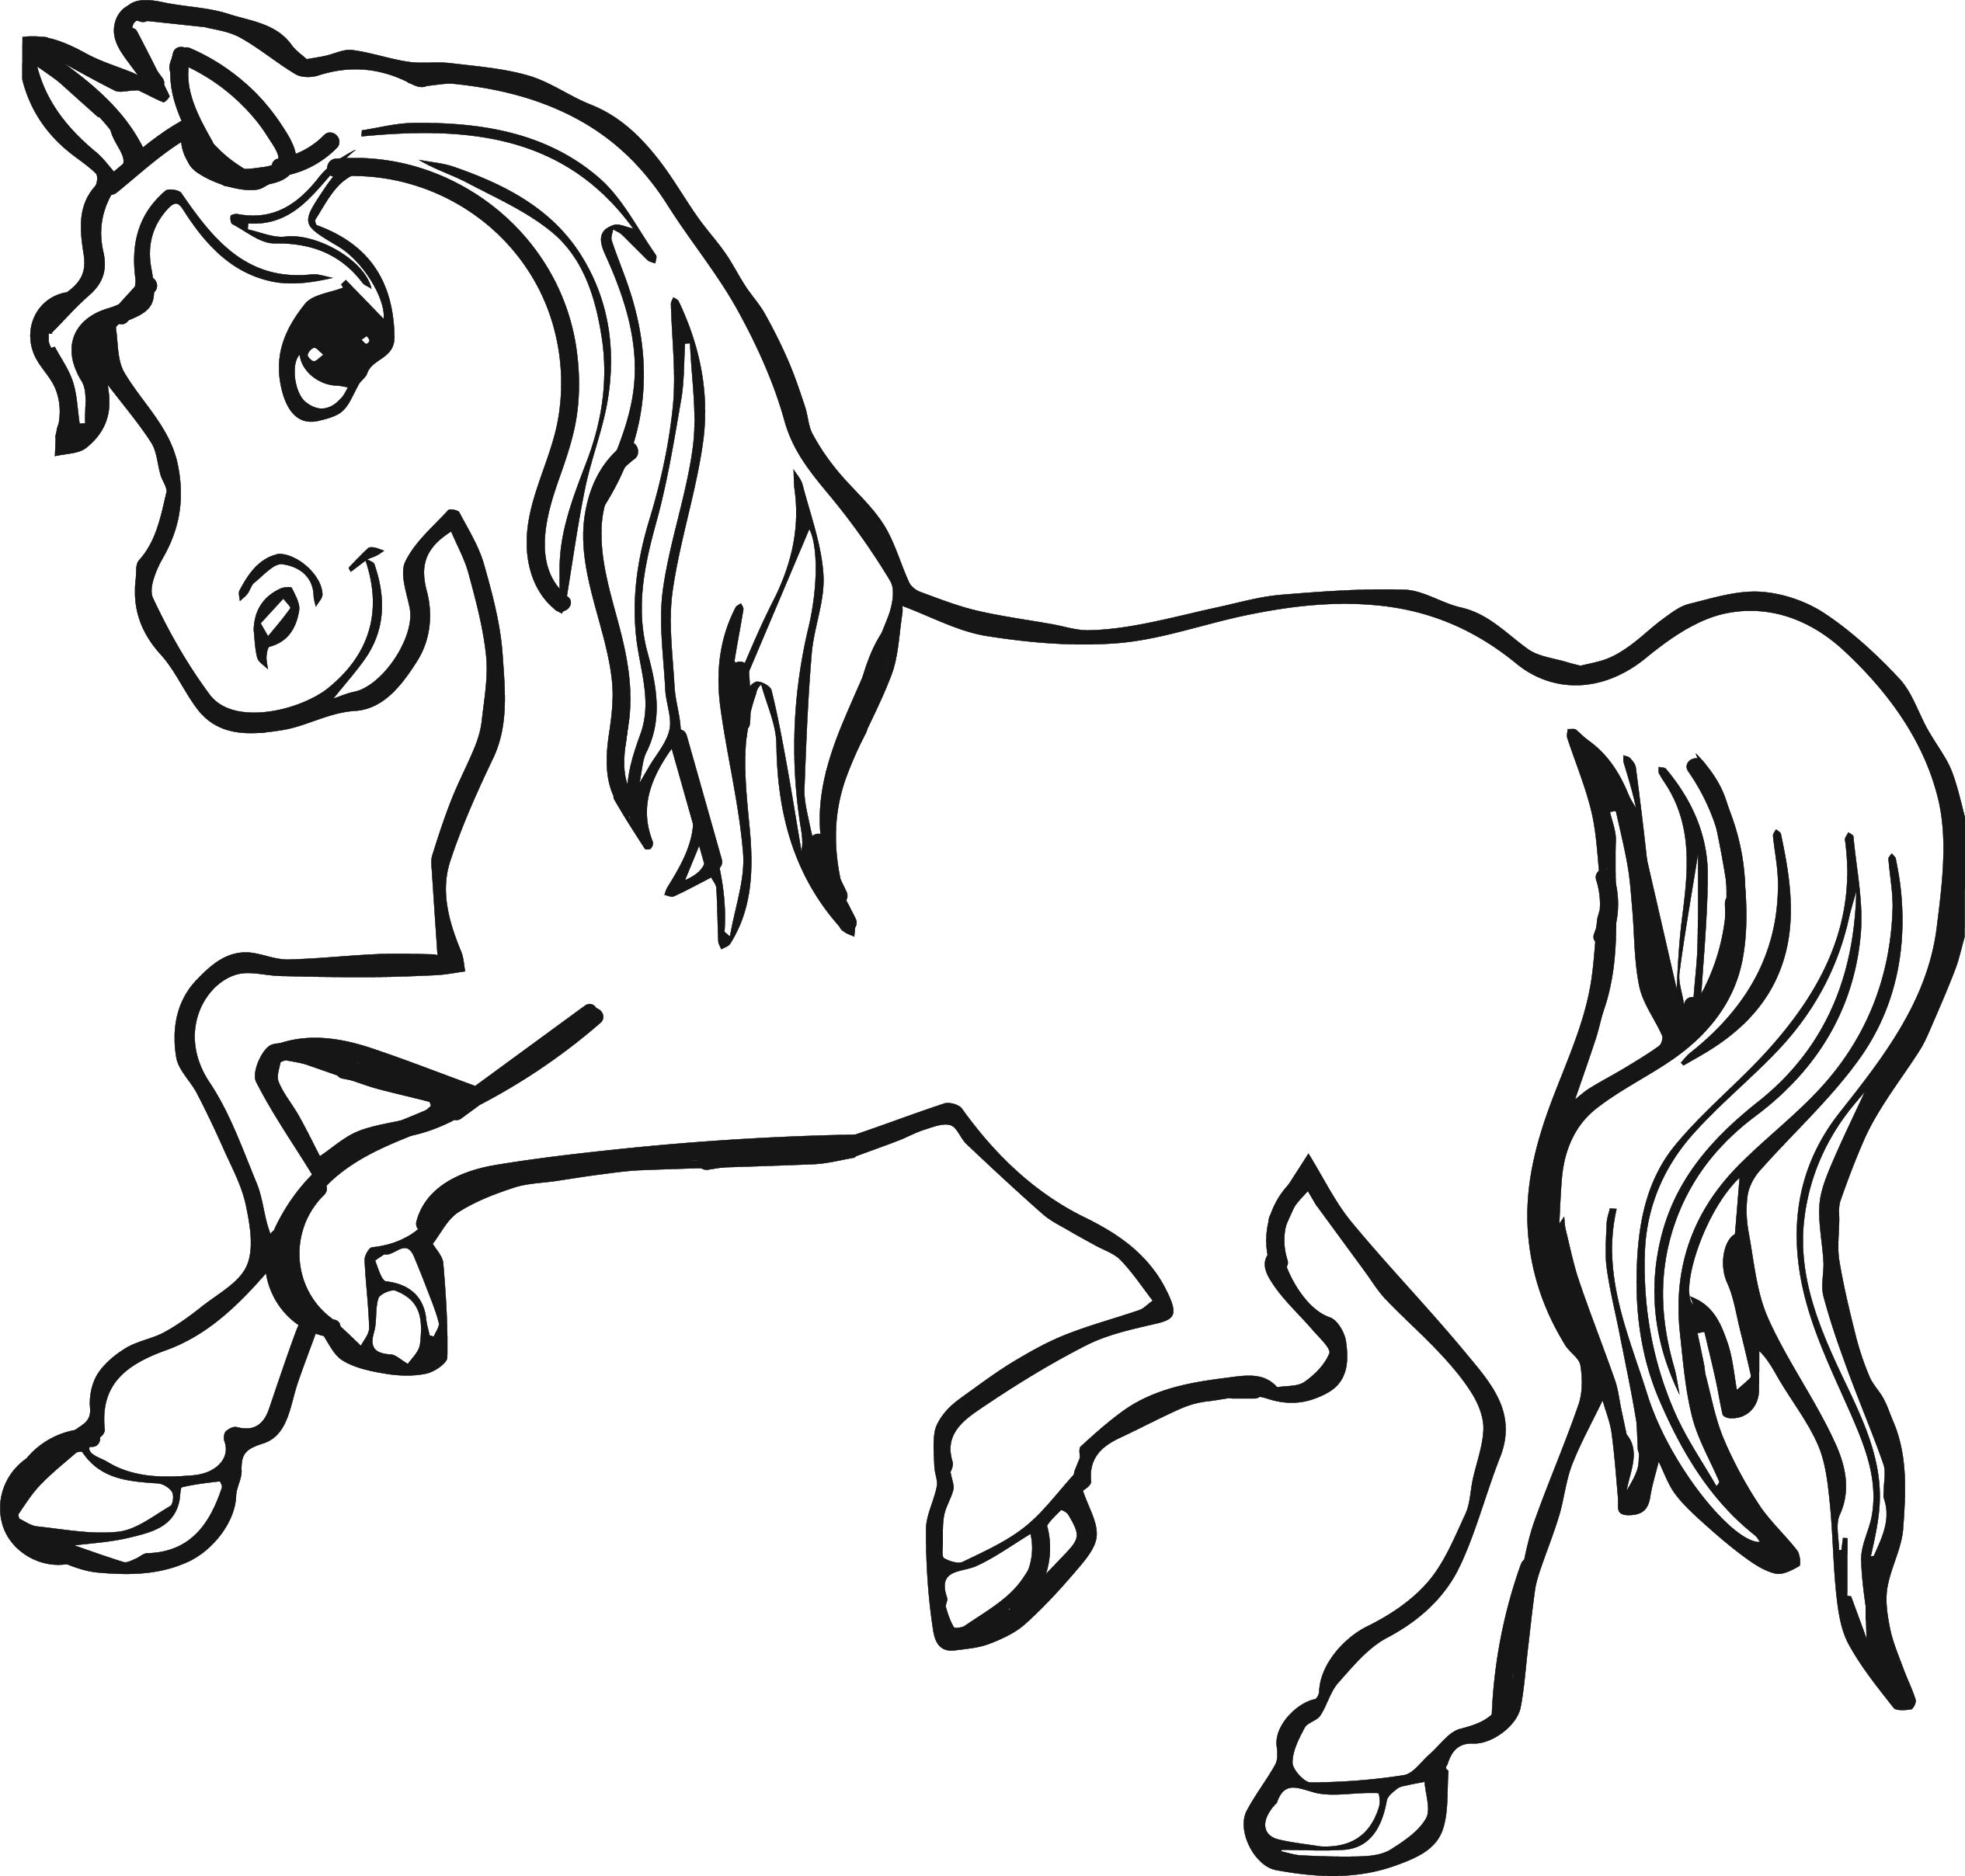 Pony Coloring Pages - Best Coloring Pages For Kids